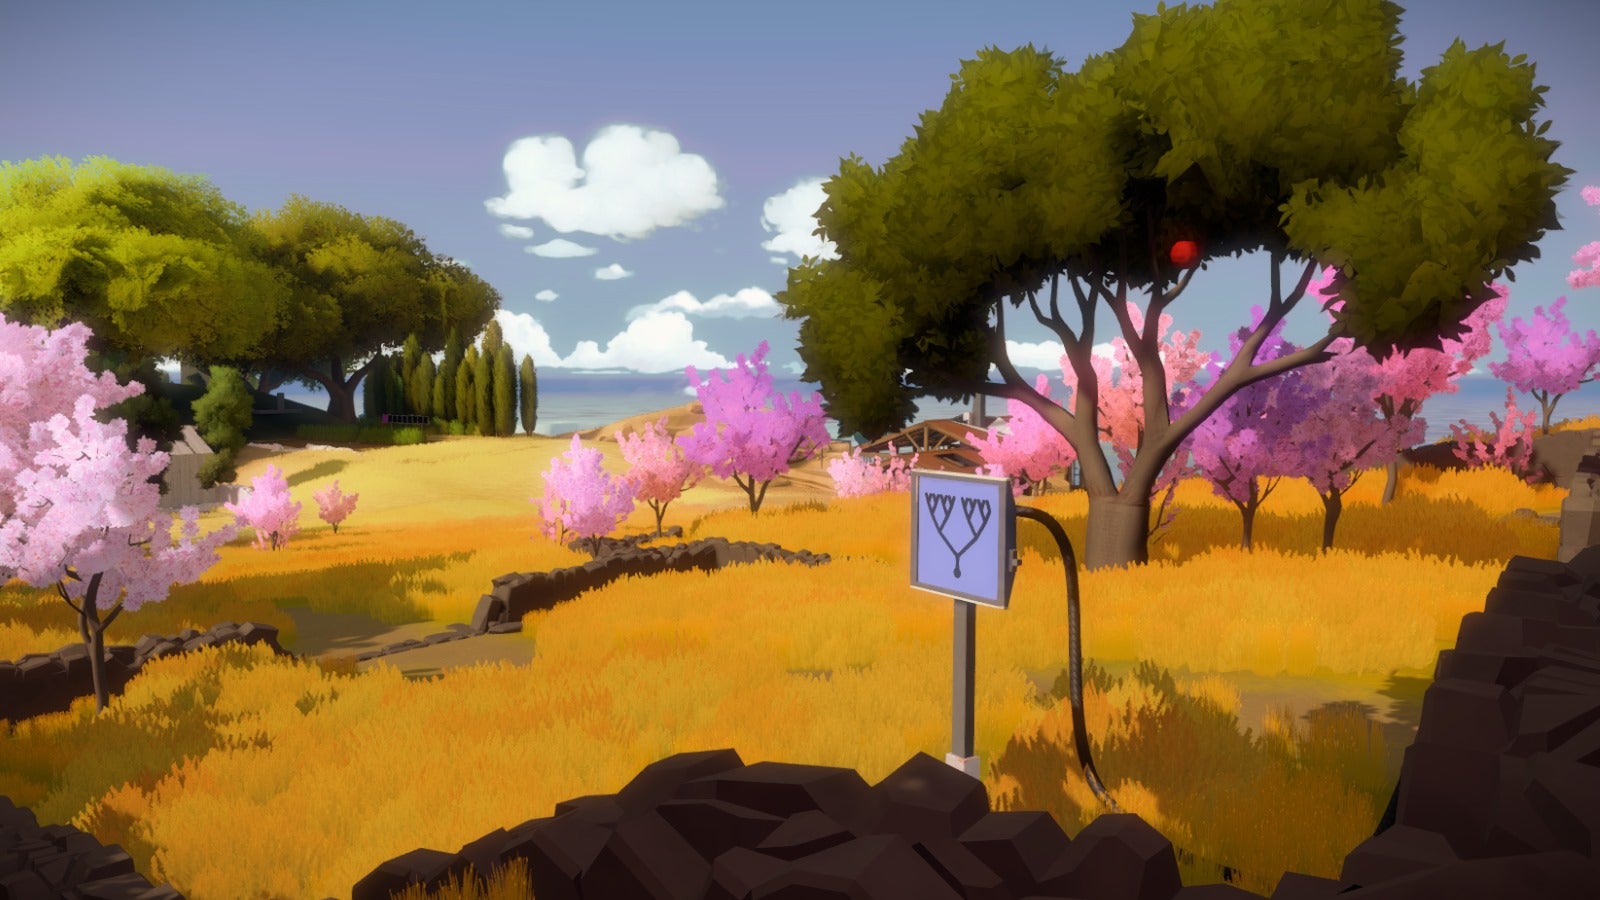 One of the puzzle sections on the island of The Witness, an orchard with puzzle pads representing the trees